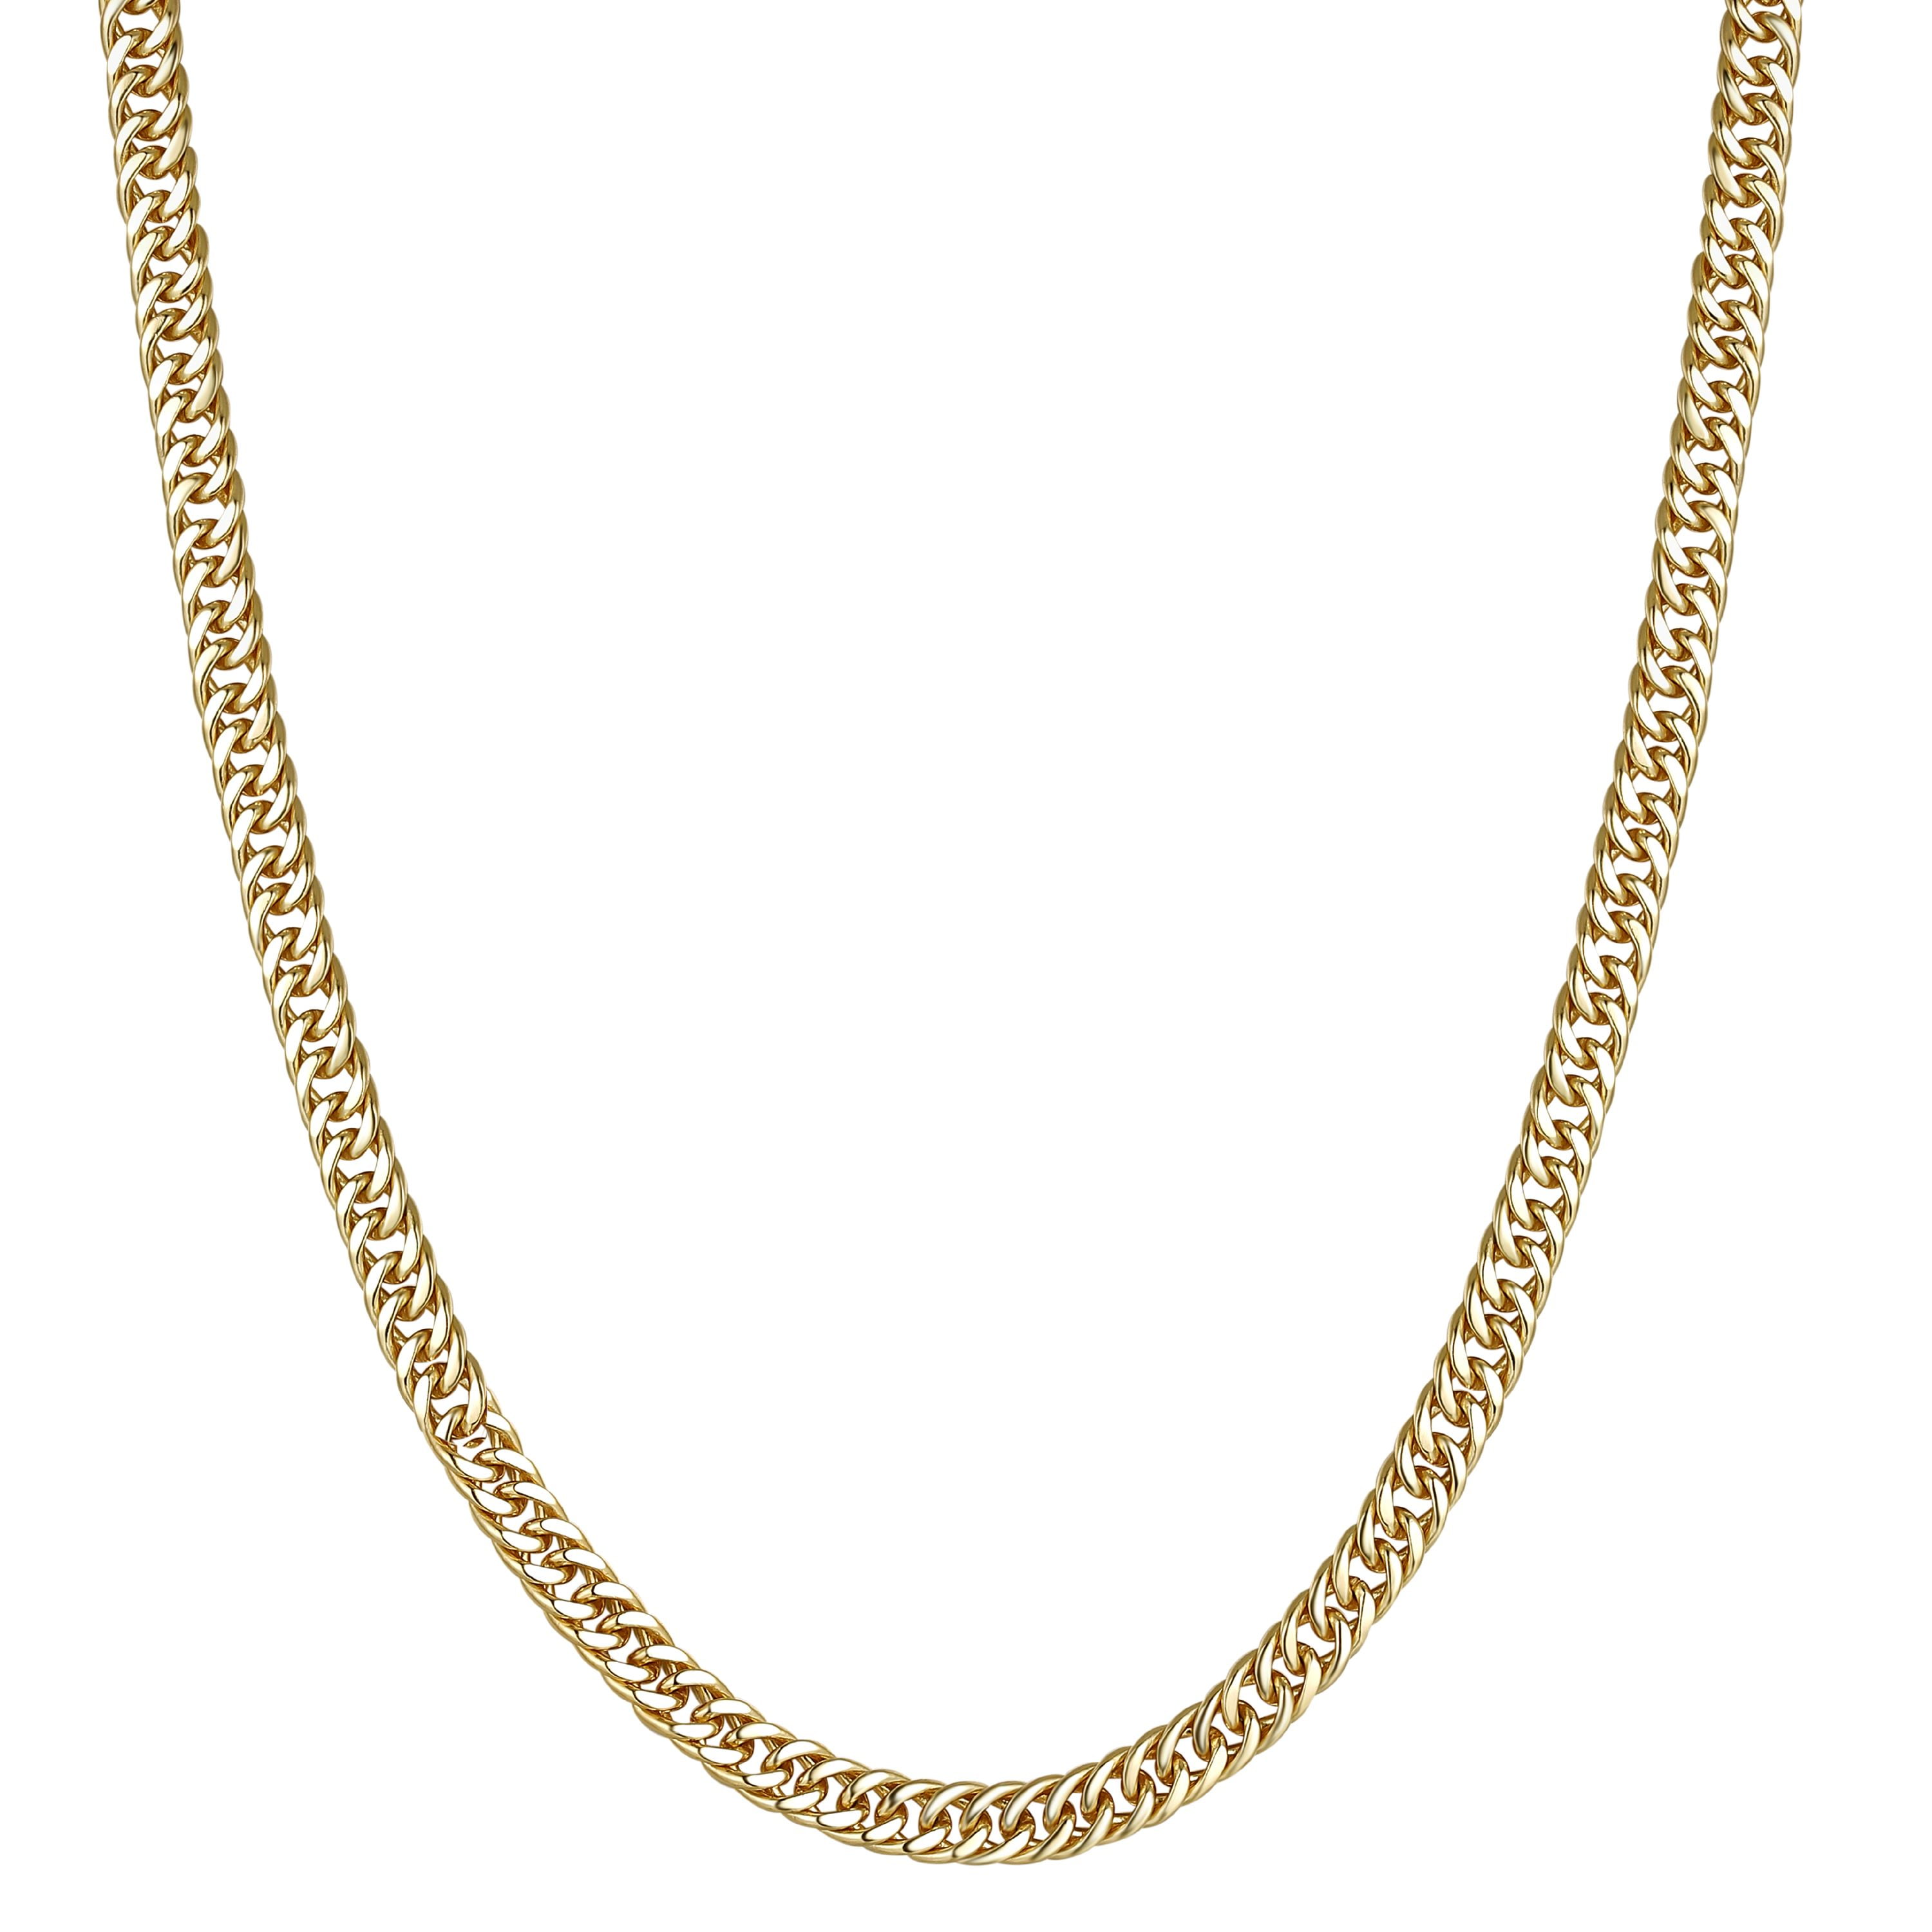 14k Yellow Gold Fish Pendant on a 14K Yellow Gold Rope Box or Curb Chain Necklace